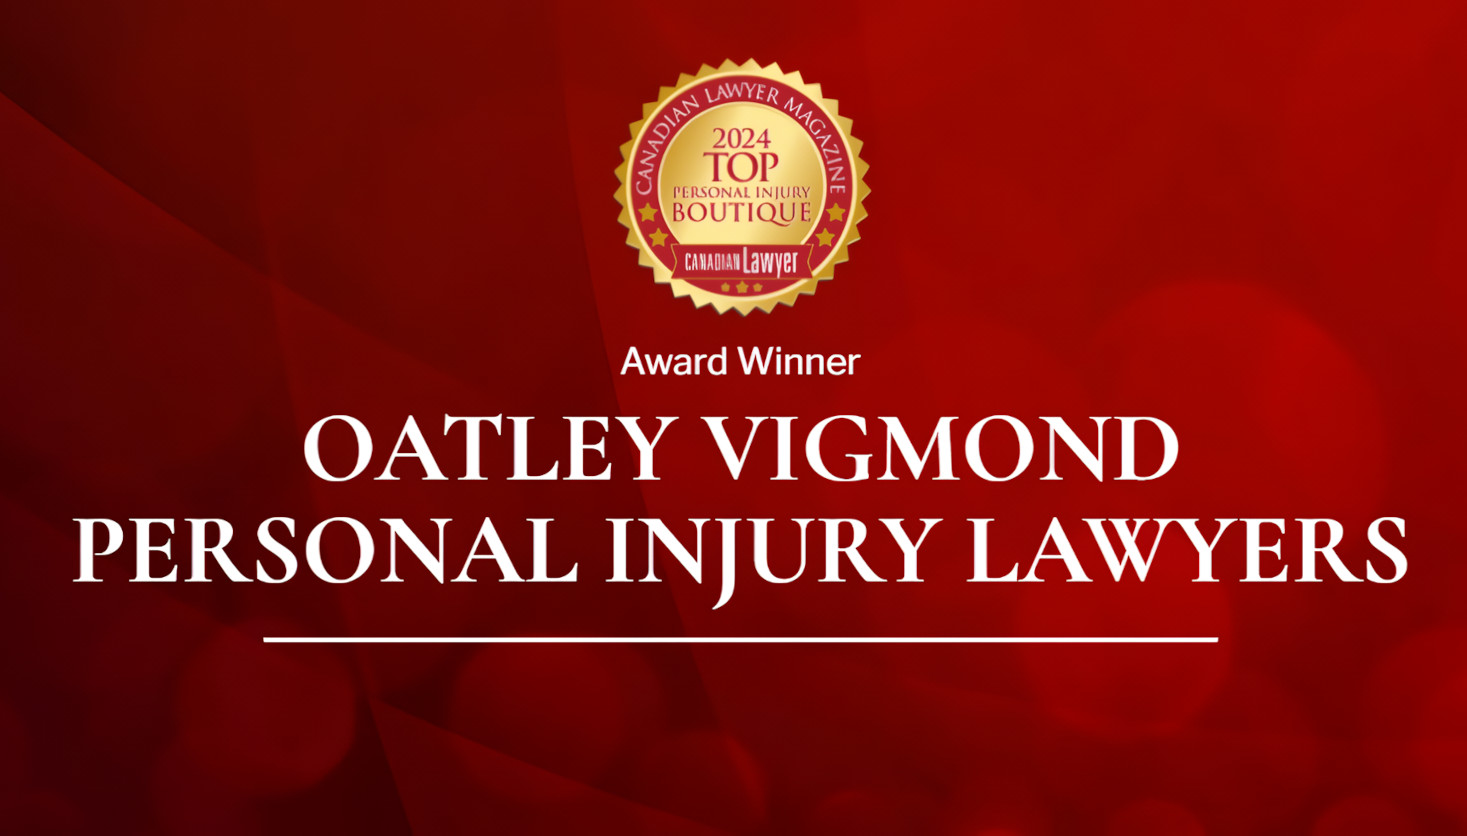 Championing Justice: Oatley Vigmond’s Trailblazing Approach to Personal Injury Litigation Leads to Recognition in Top Personal Injury Boutique Award